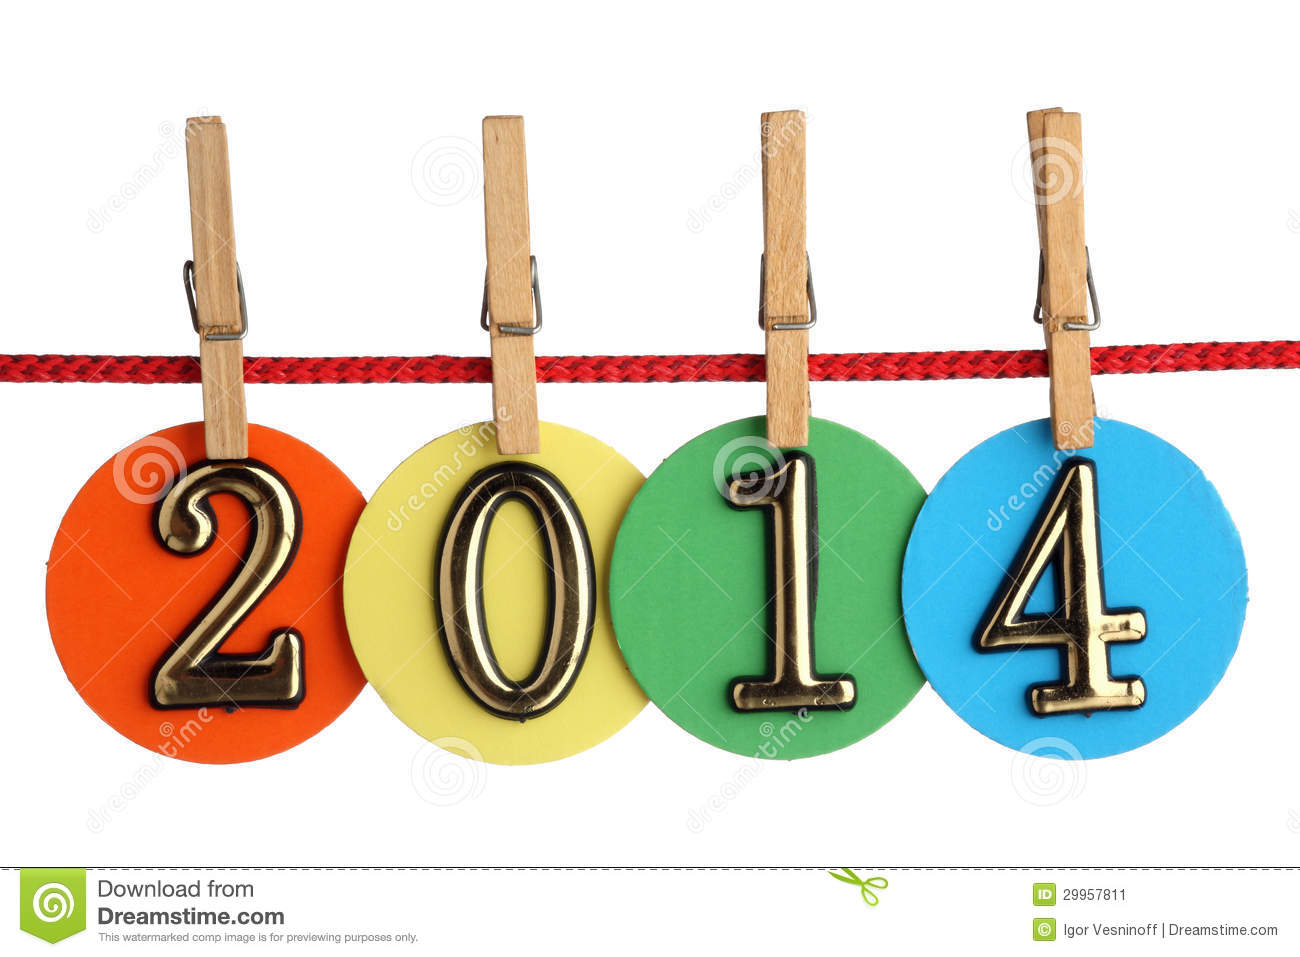 Number 2014 On A Red Rope Stock Image   Image  29957811